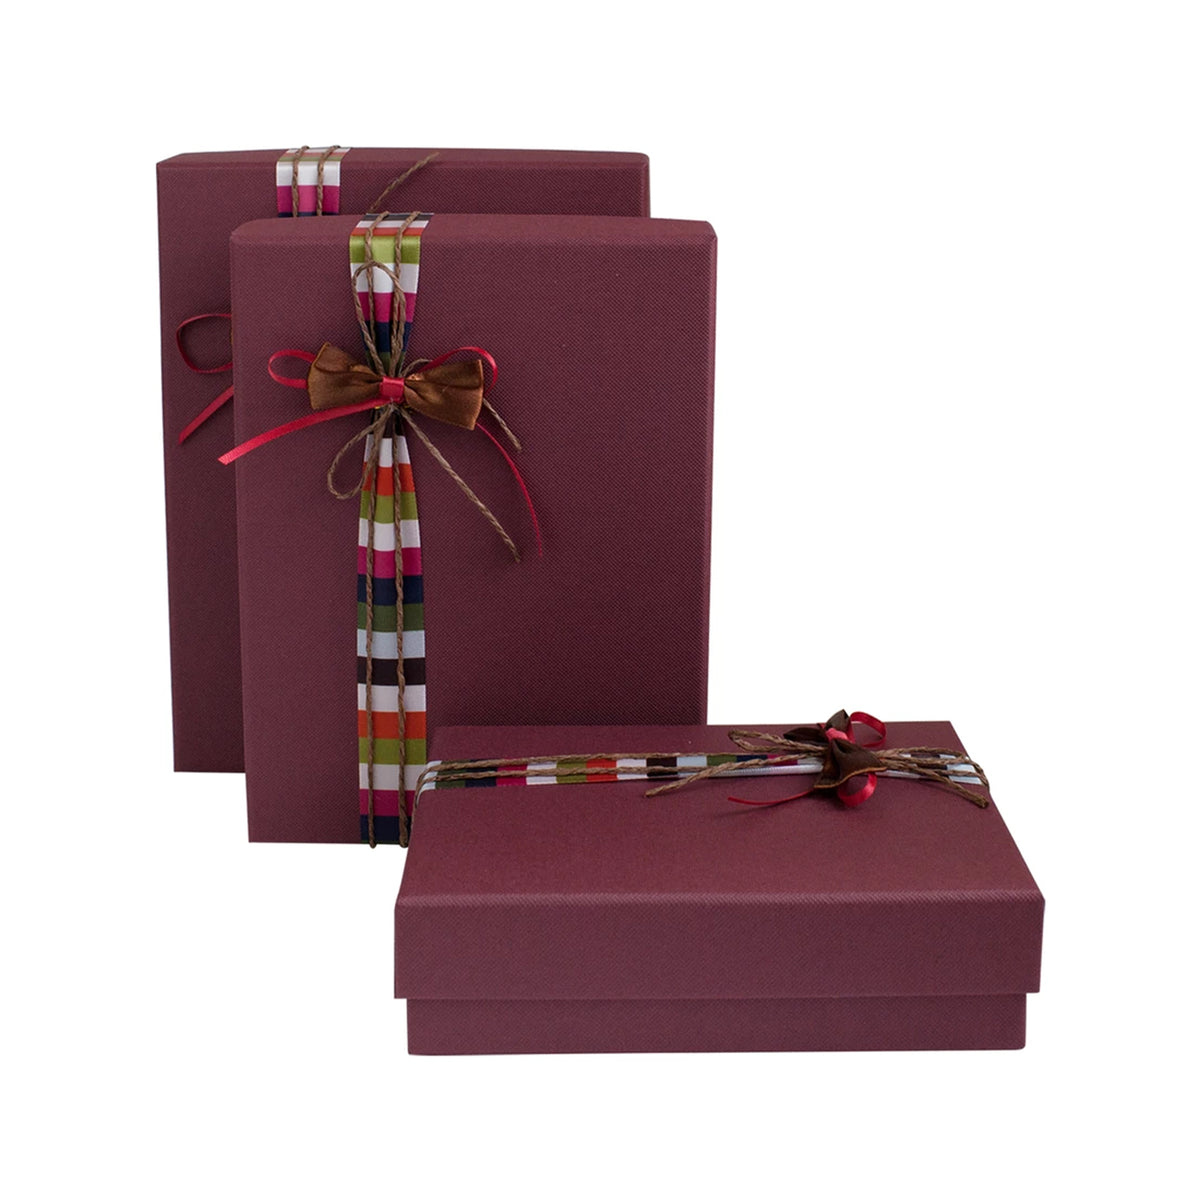 Set of 3 Burgundy Striped Bow Gift Boxes (Sizes Available)